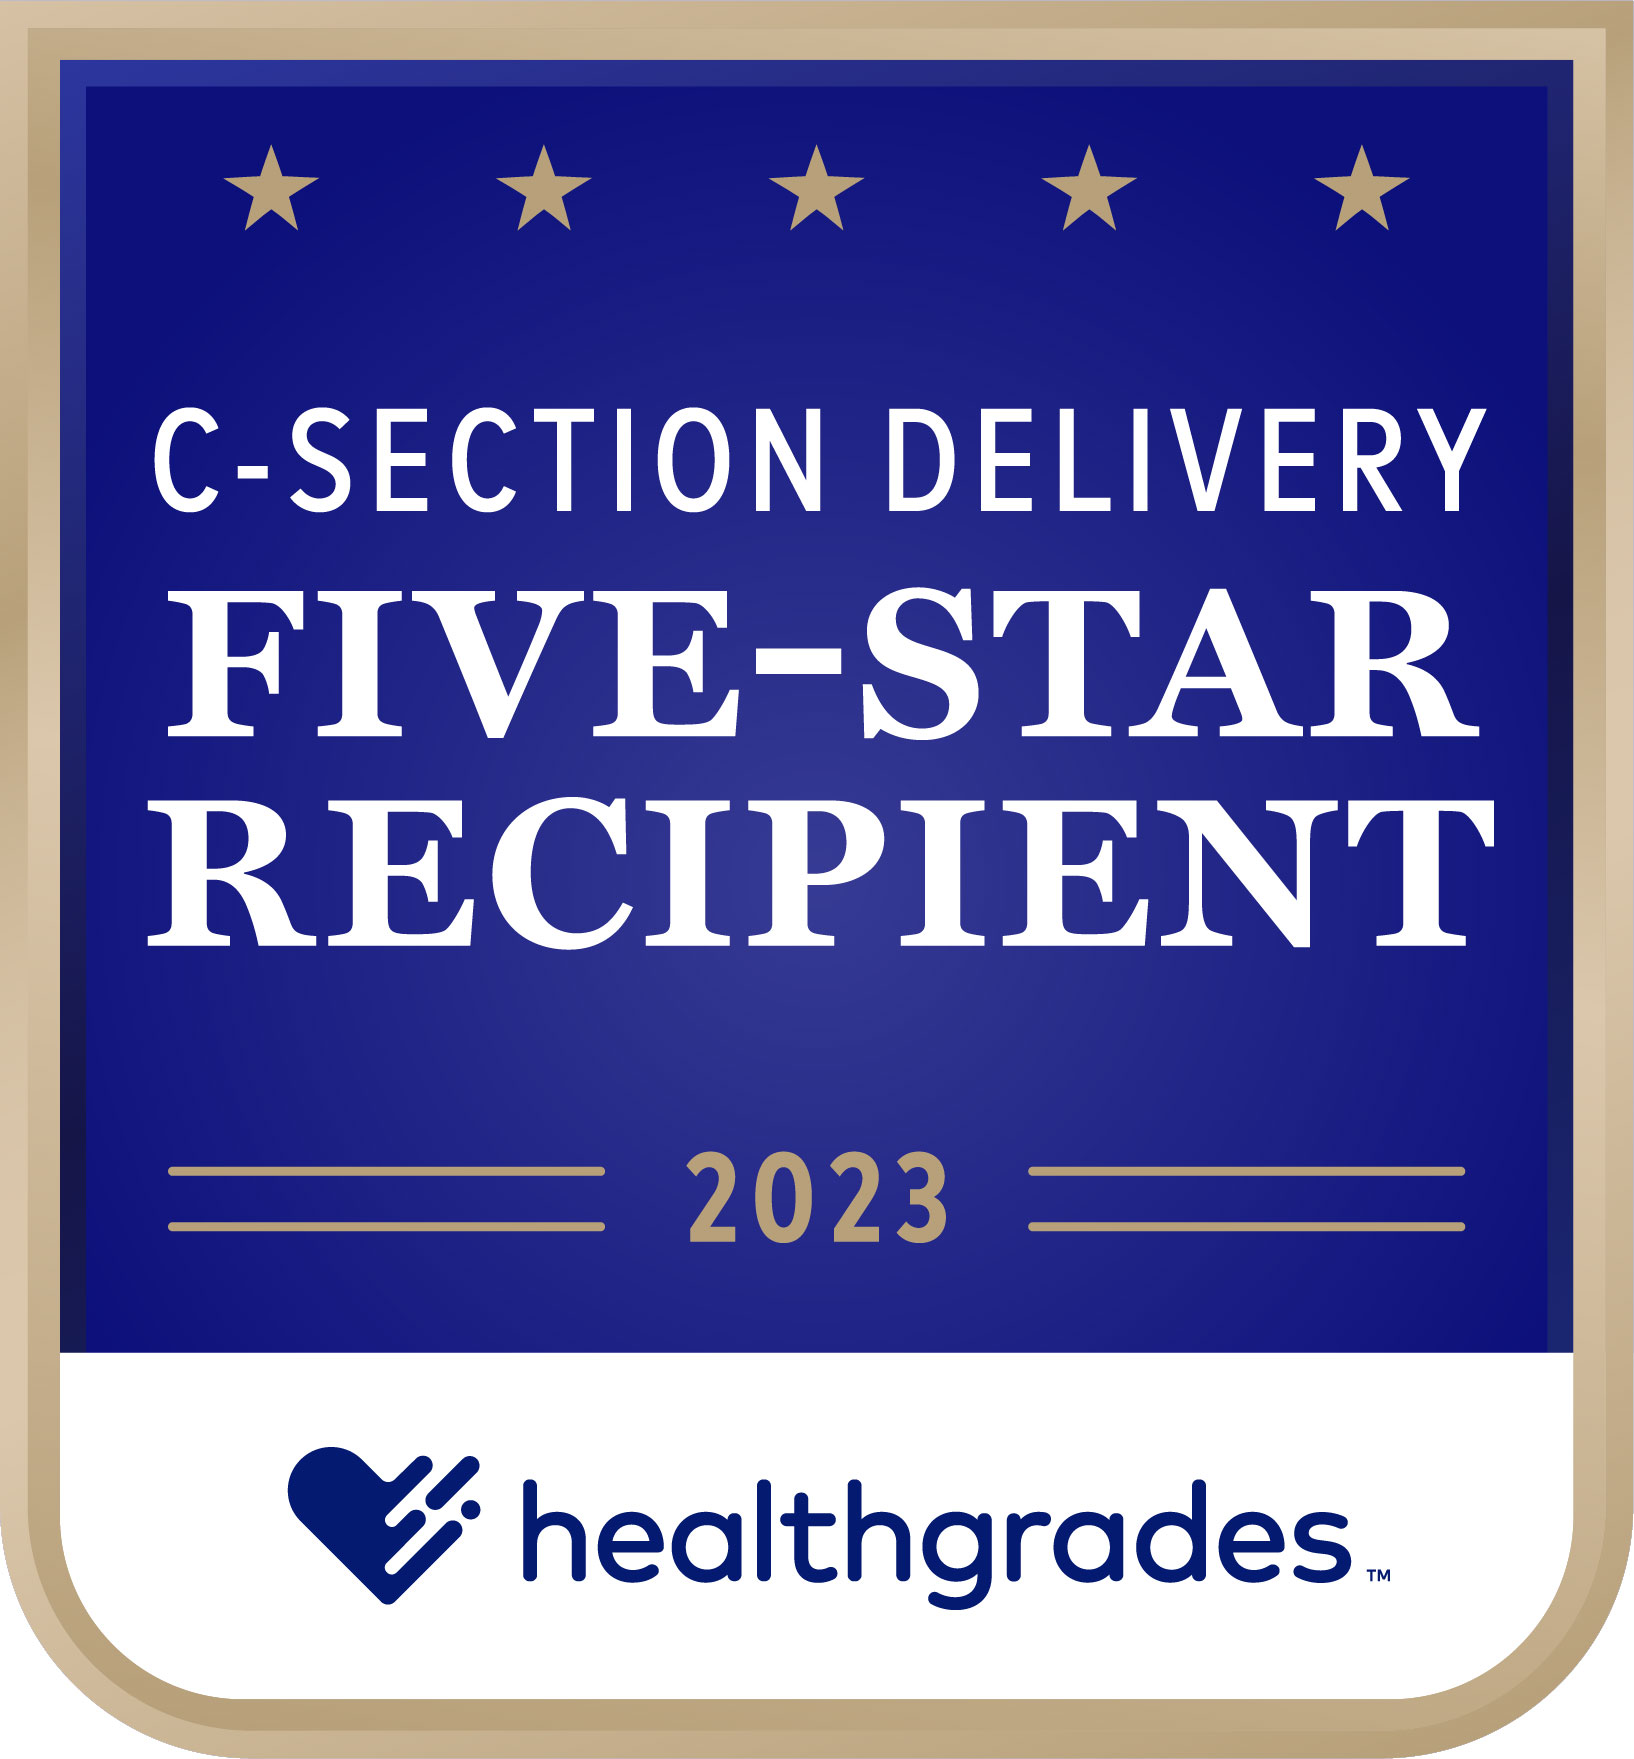 Five-Star_C-Section_Delivery_2023